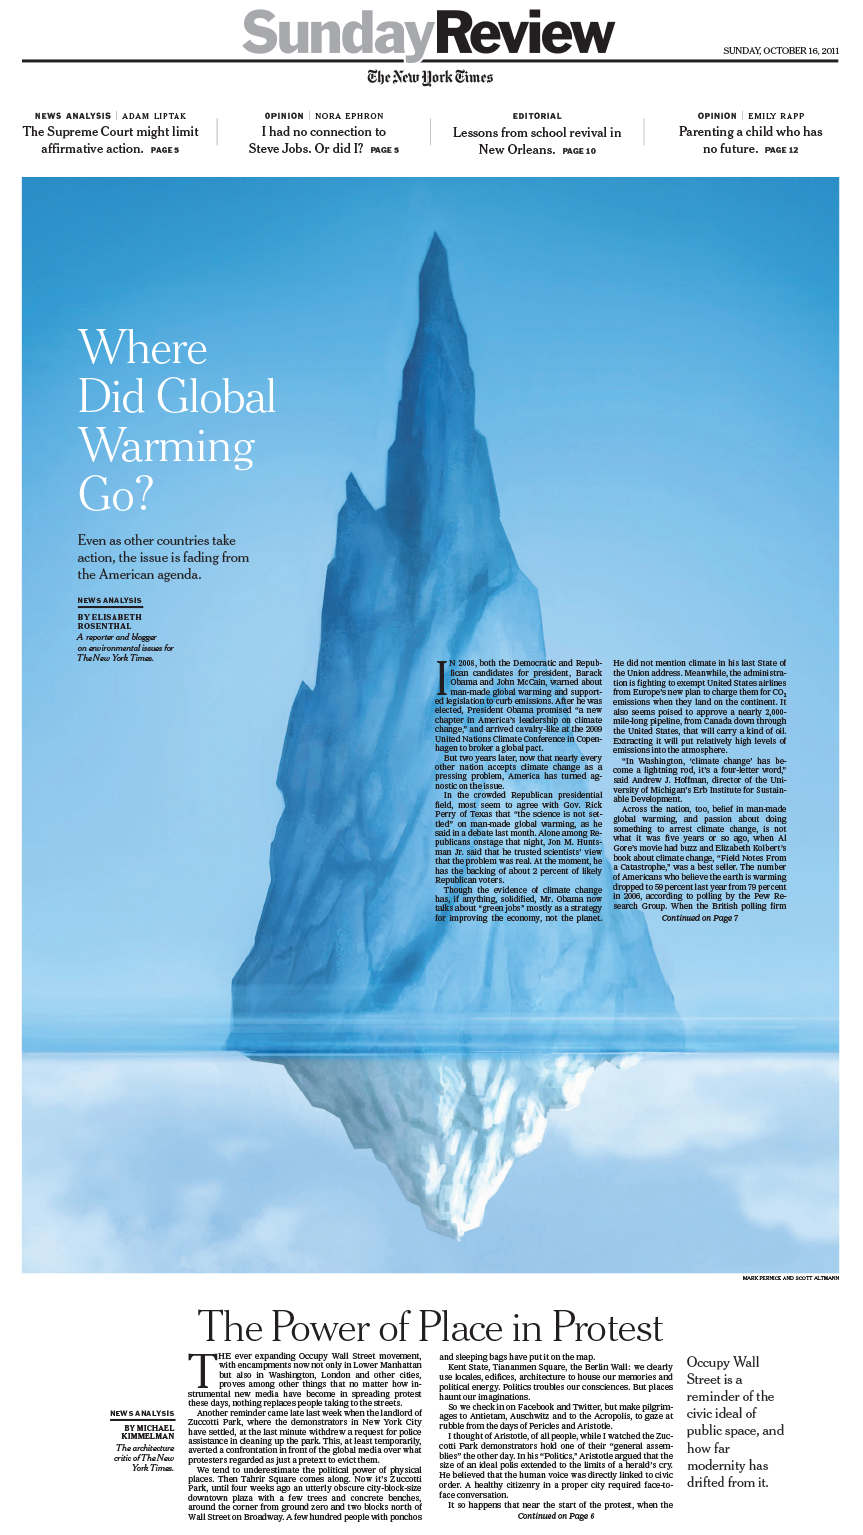 Sunday Review Cover: Where Did Global Warming Go?